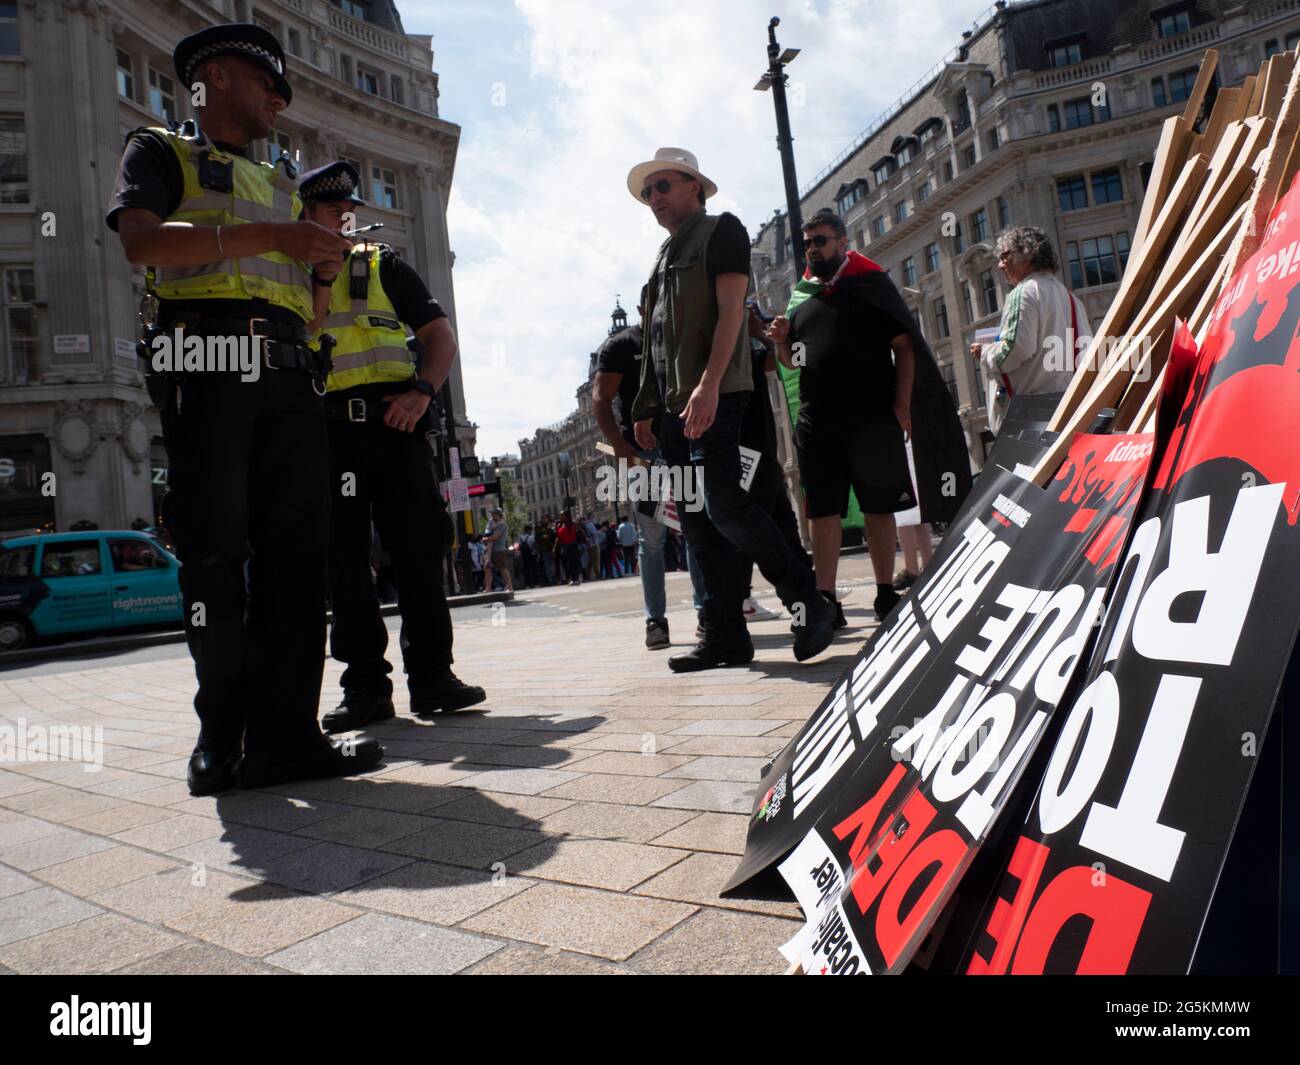 London protests, Activists protest in Central London at the People's Assembly National Demonstration, Police officers chat with protesters with Defy Tory rule placards made by socialist worker party in foreground Stock Photo